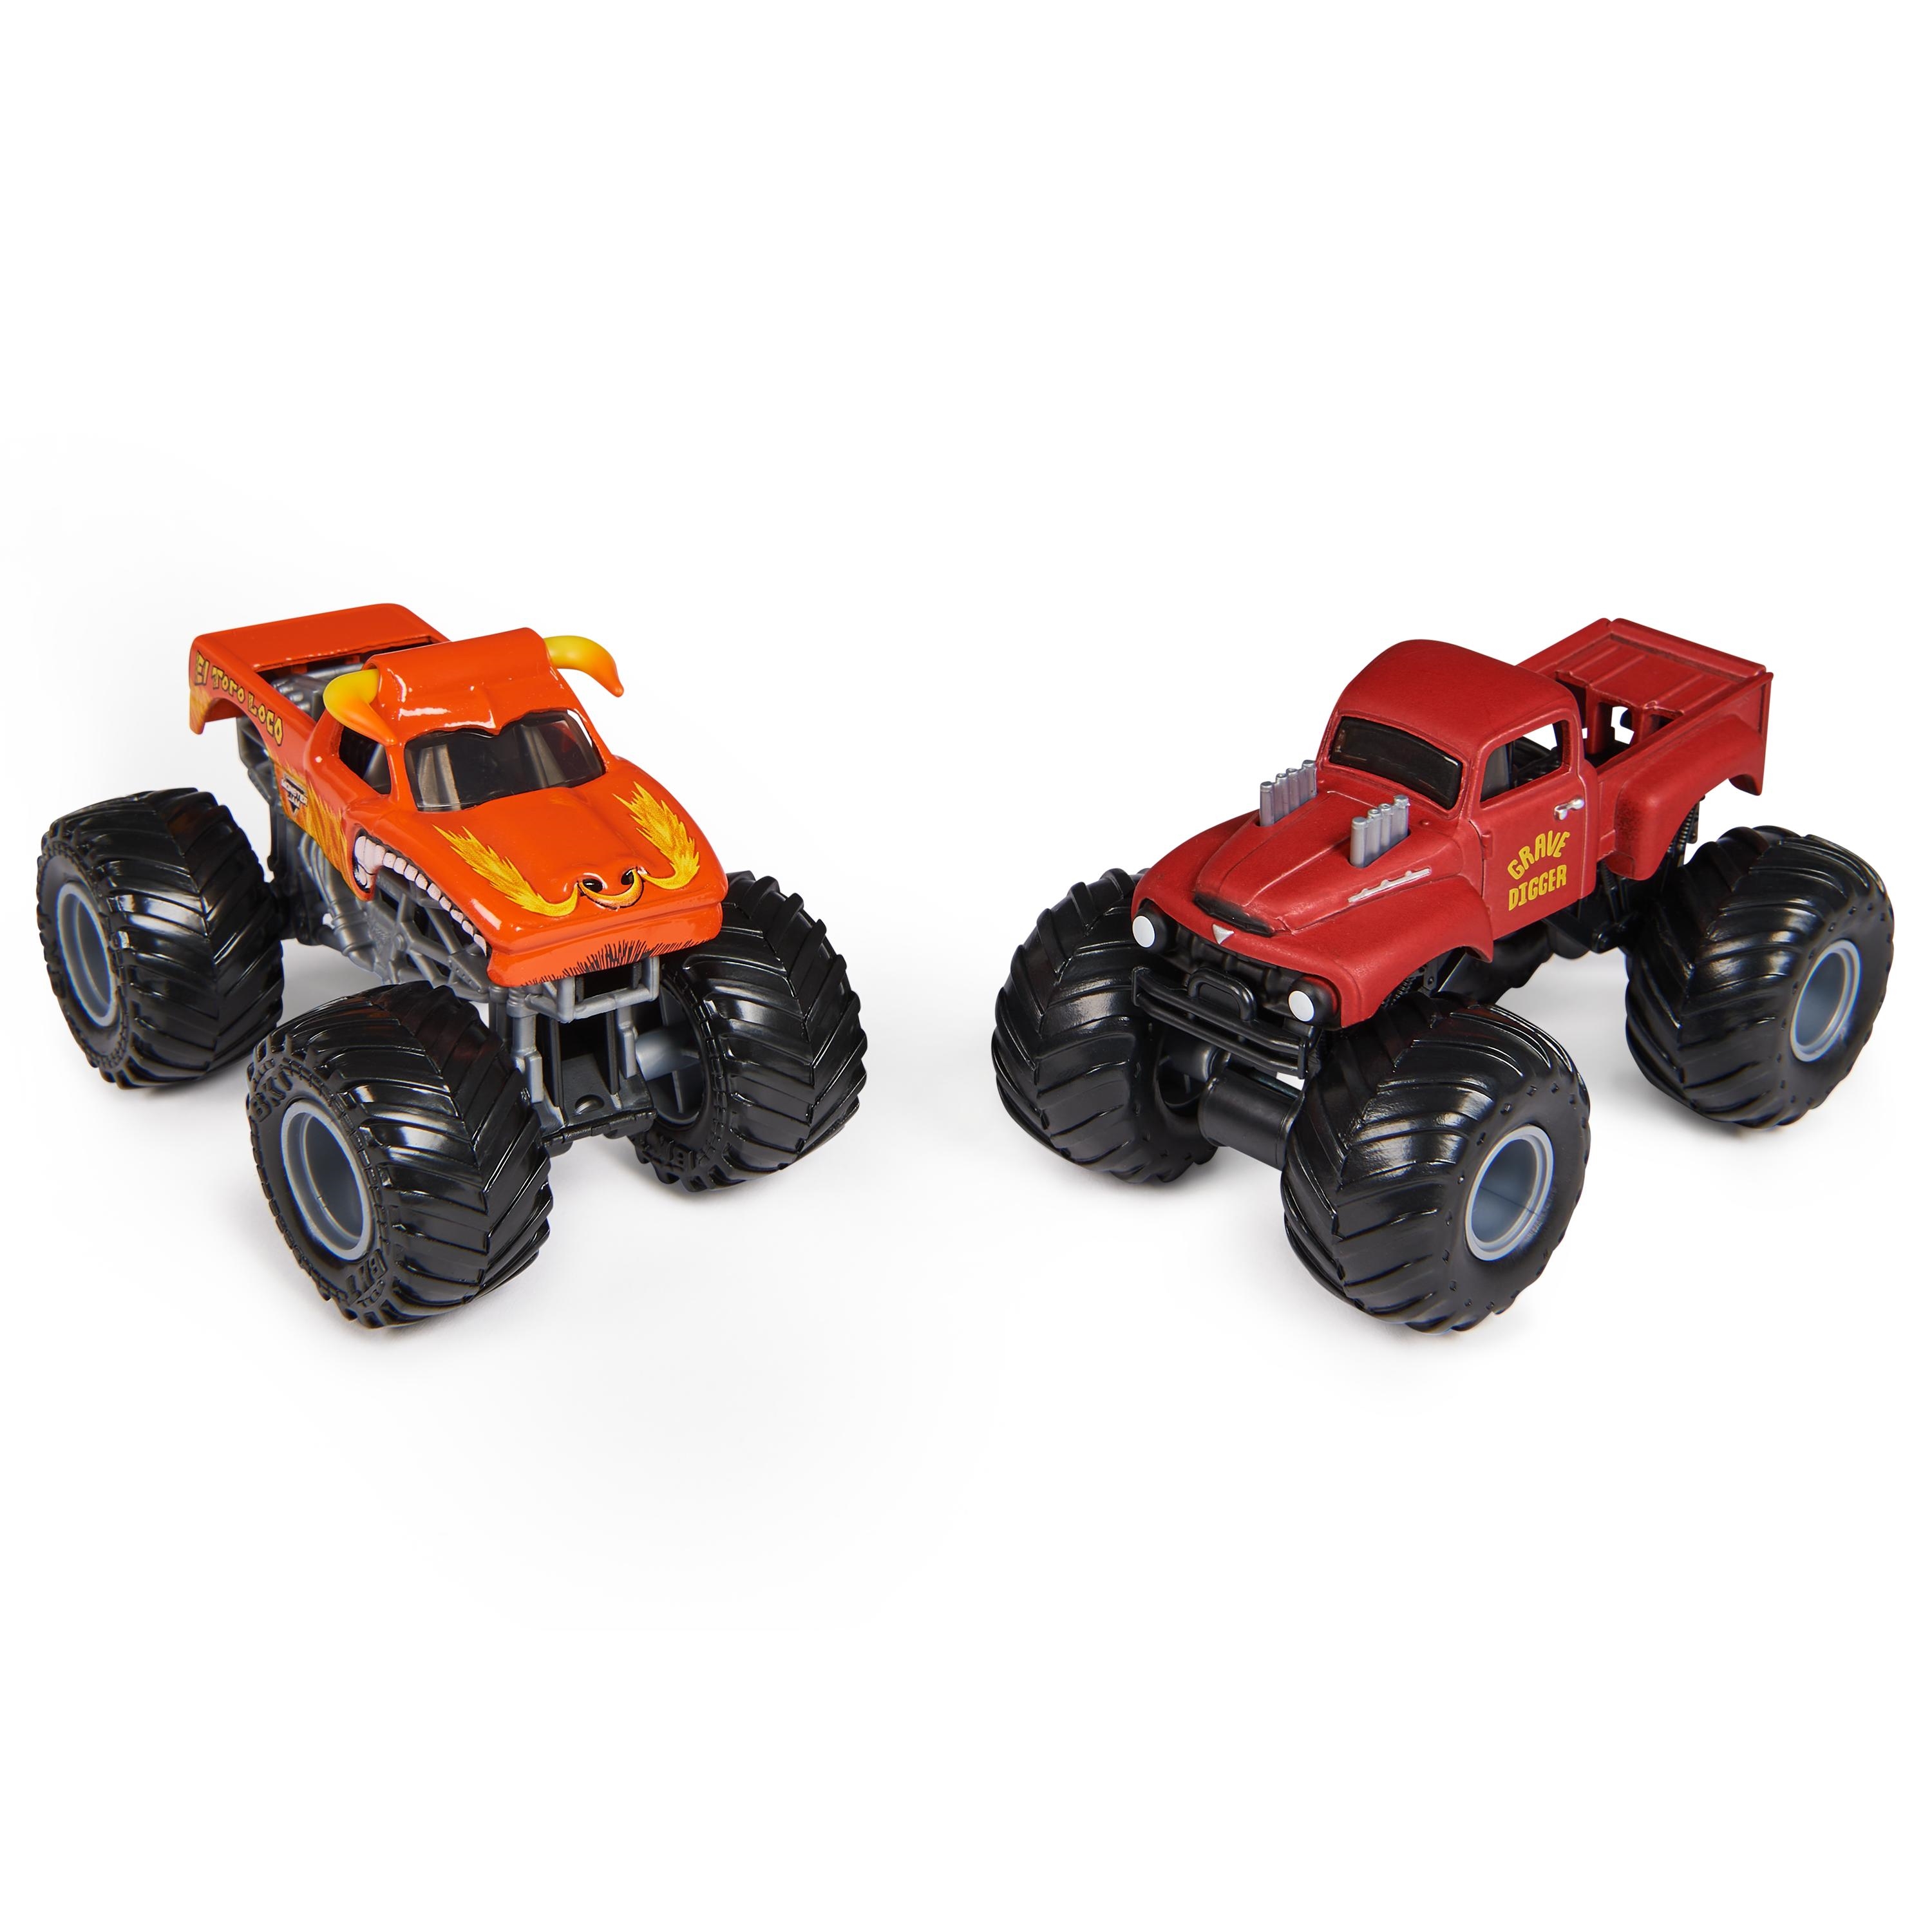 Monster Jam, Official Calavera Monster Truck, Collector Die-Cast Vehicle,  1:24 Scale, Kids Toys for Boys Ages 3 and up